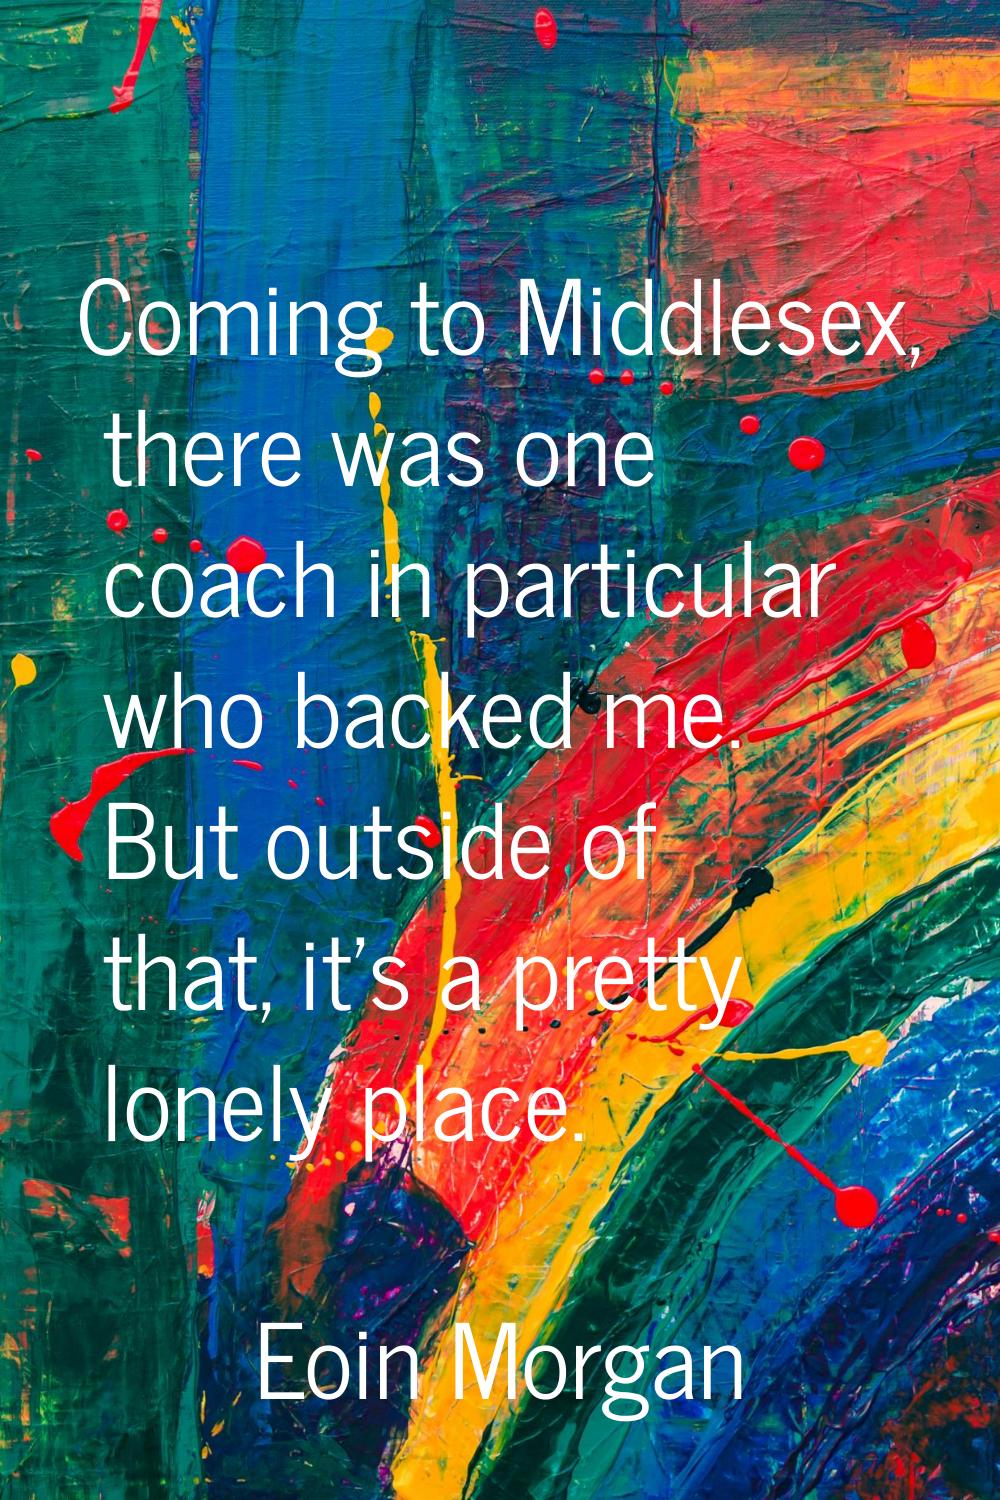 Coming to Middlesex, there was one coach in particular who backed me. But outside of that, it's a p